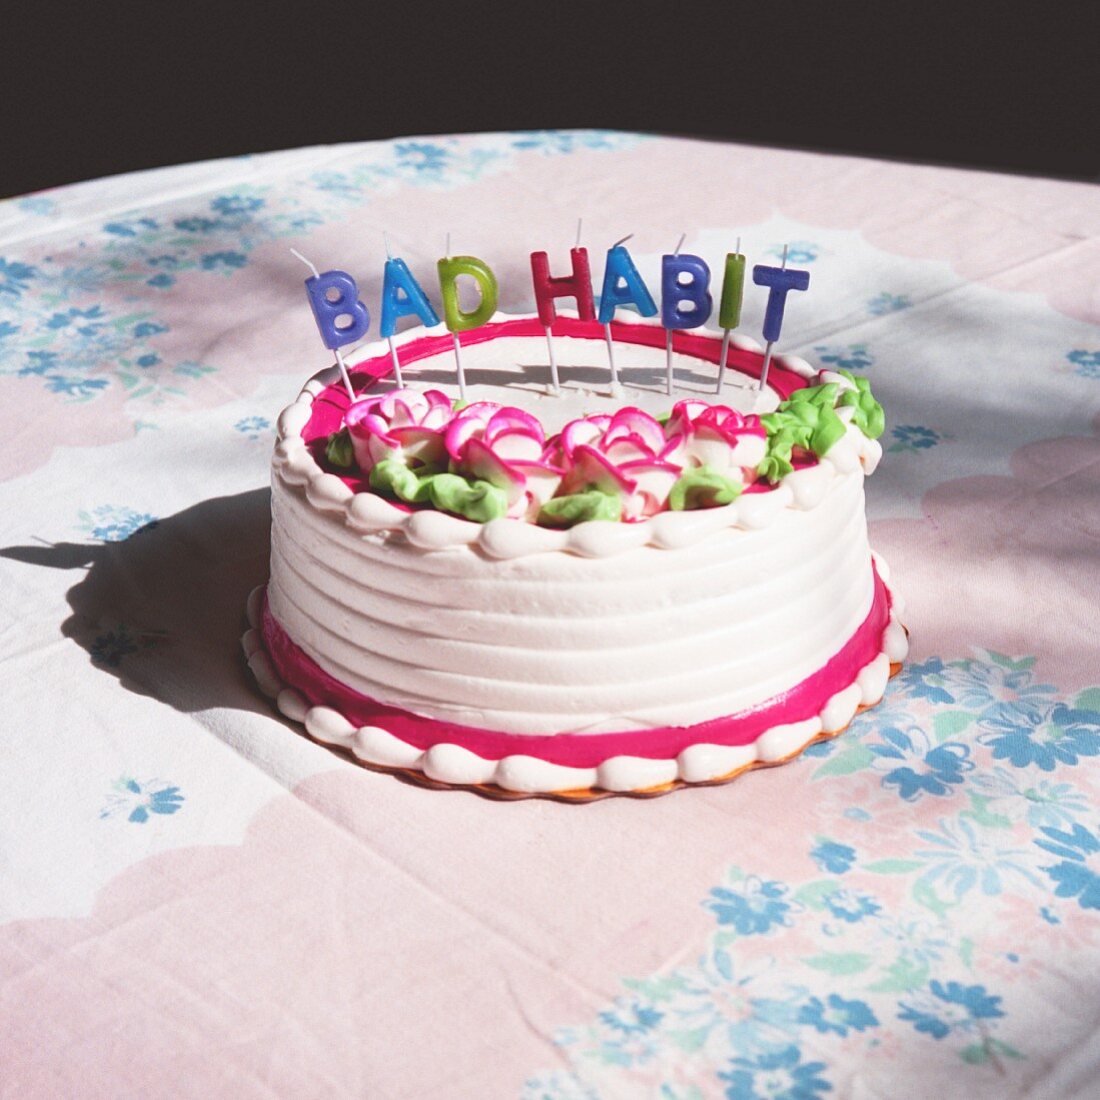 A birthday cake with candles spelling the phrase 'Bad habit'